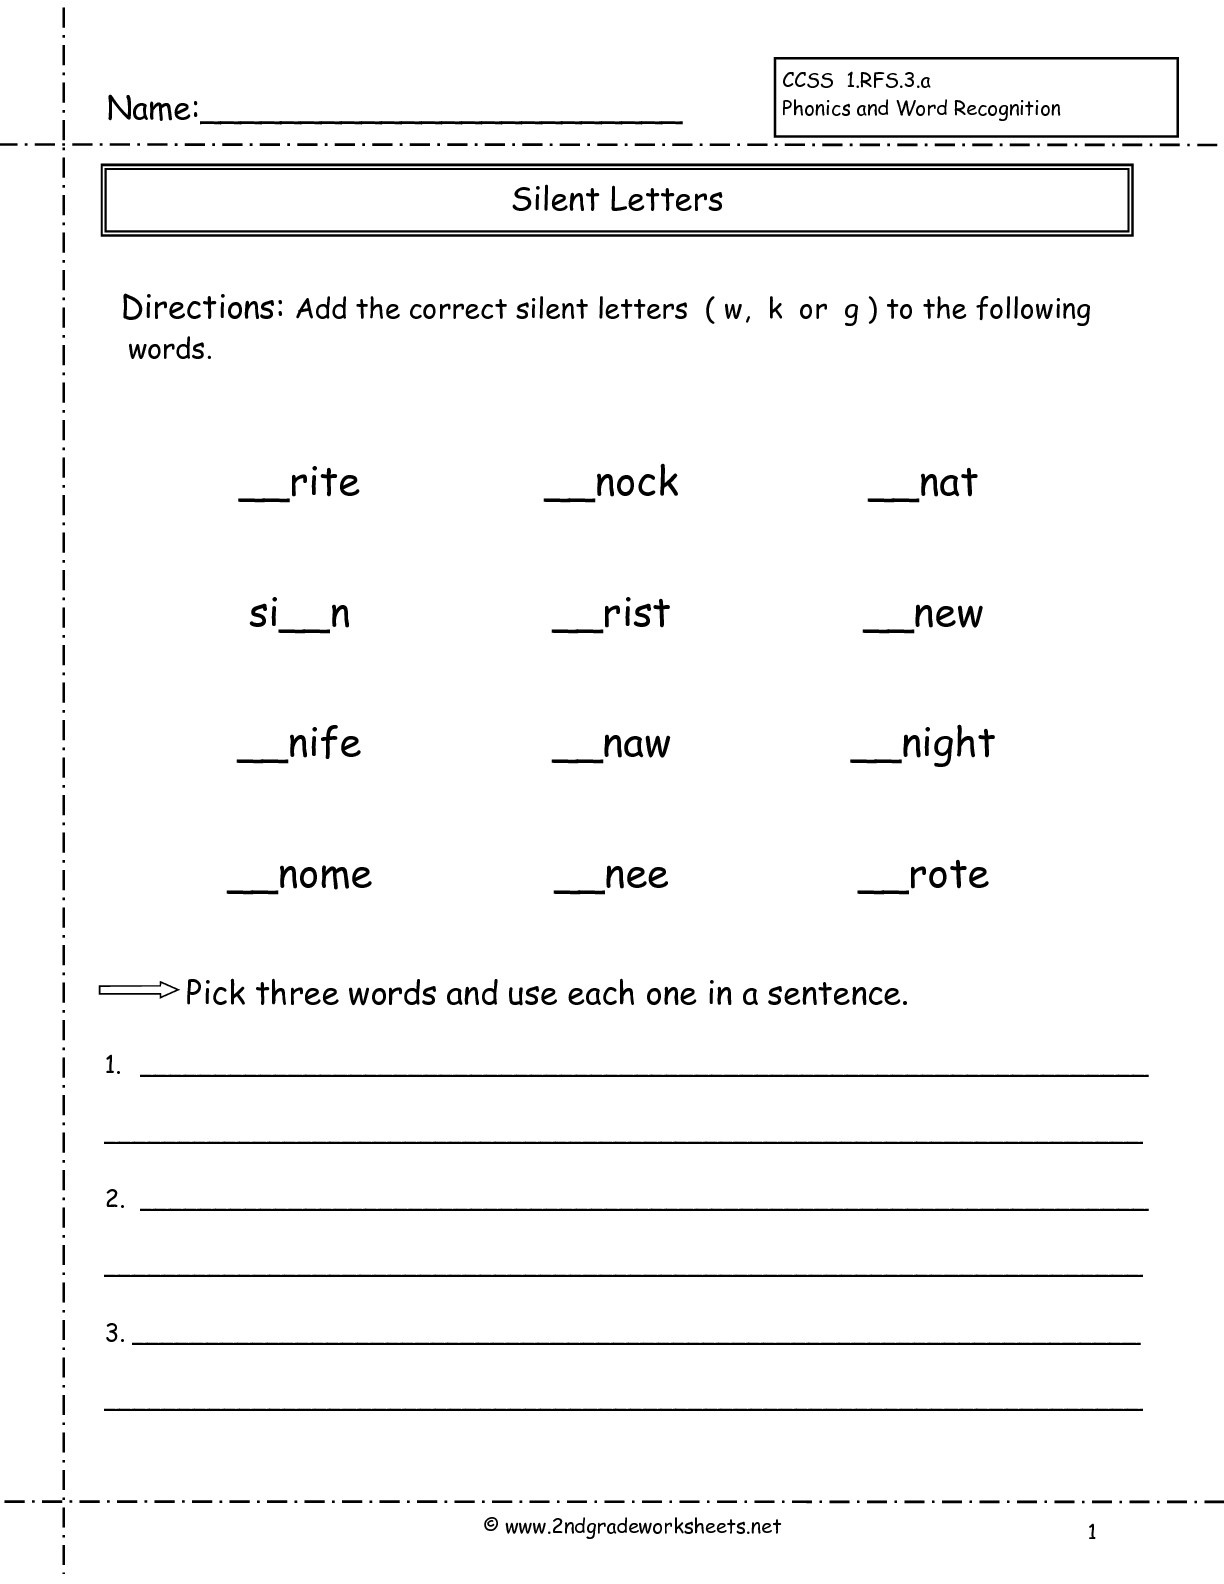 second-grade-phonics-worksheets-and-flashcards-free-printable-phonics